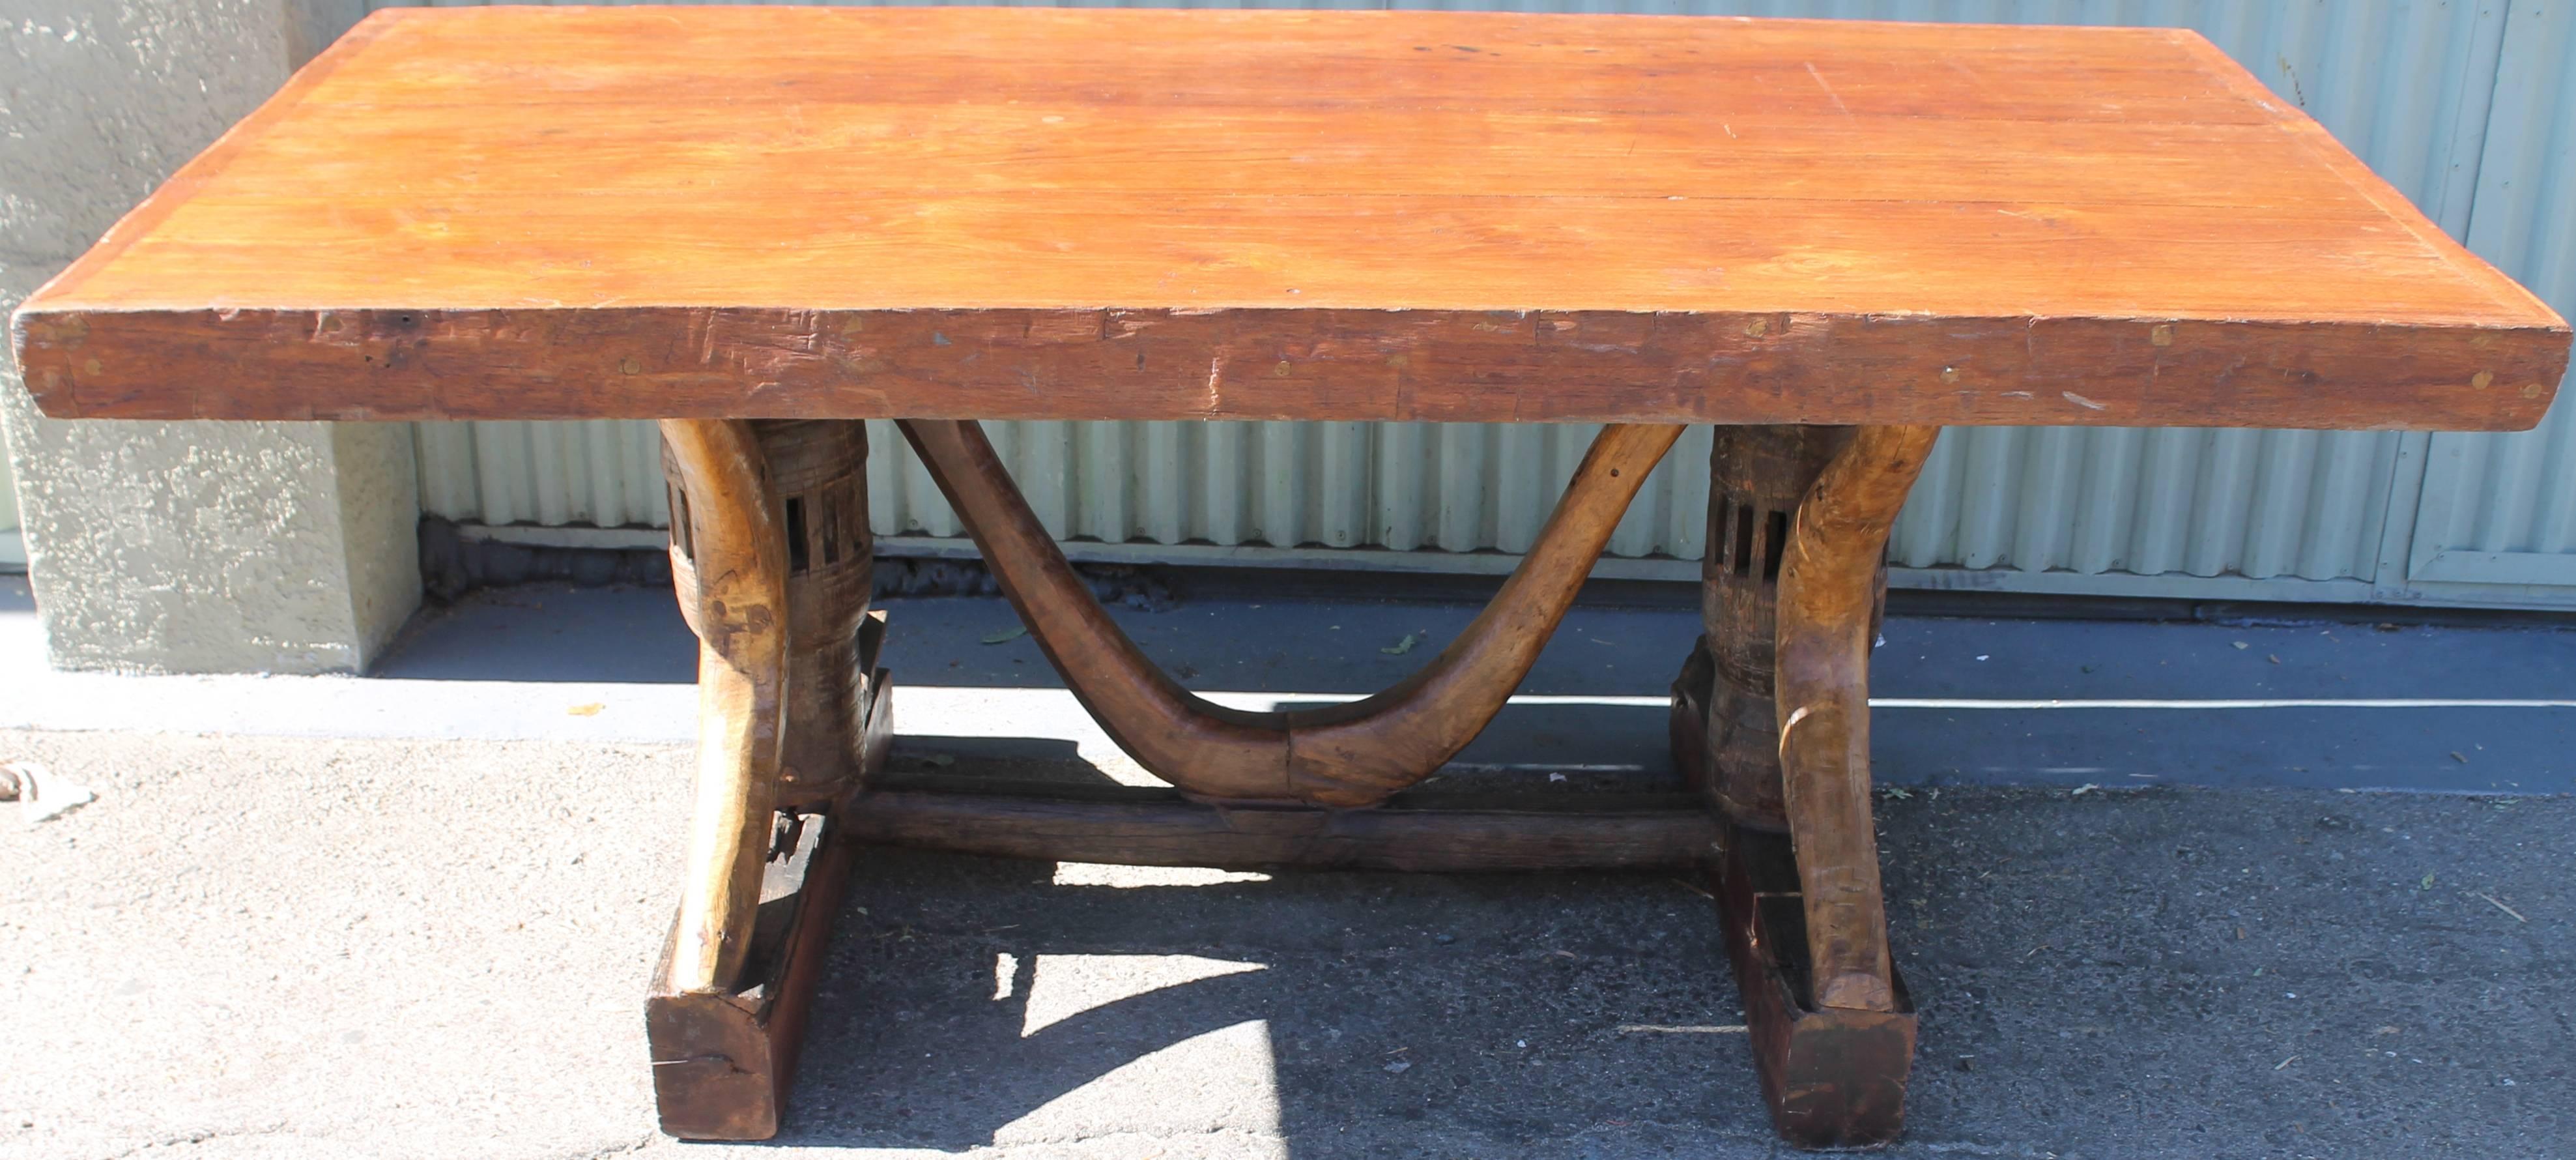 This 20th century table made from 19th century ox carts is an incredible marriage of two worlds. This all occasion table has a thick plank top with thick and strong ox cart parts and the base. This item has minor wear consistent with its age and use.